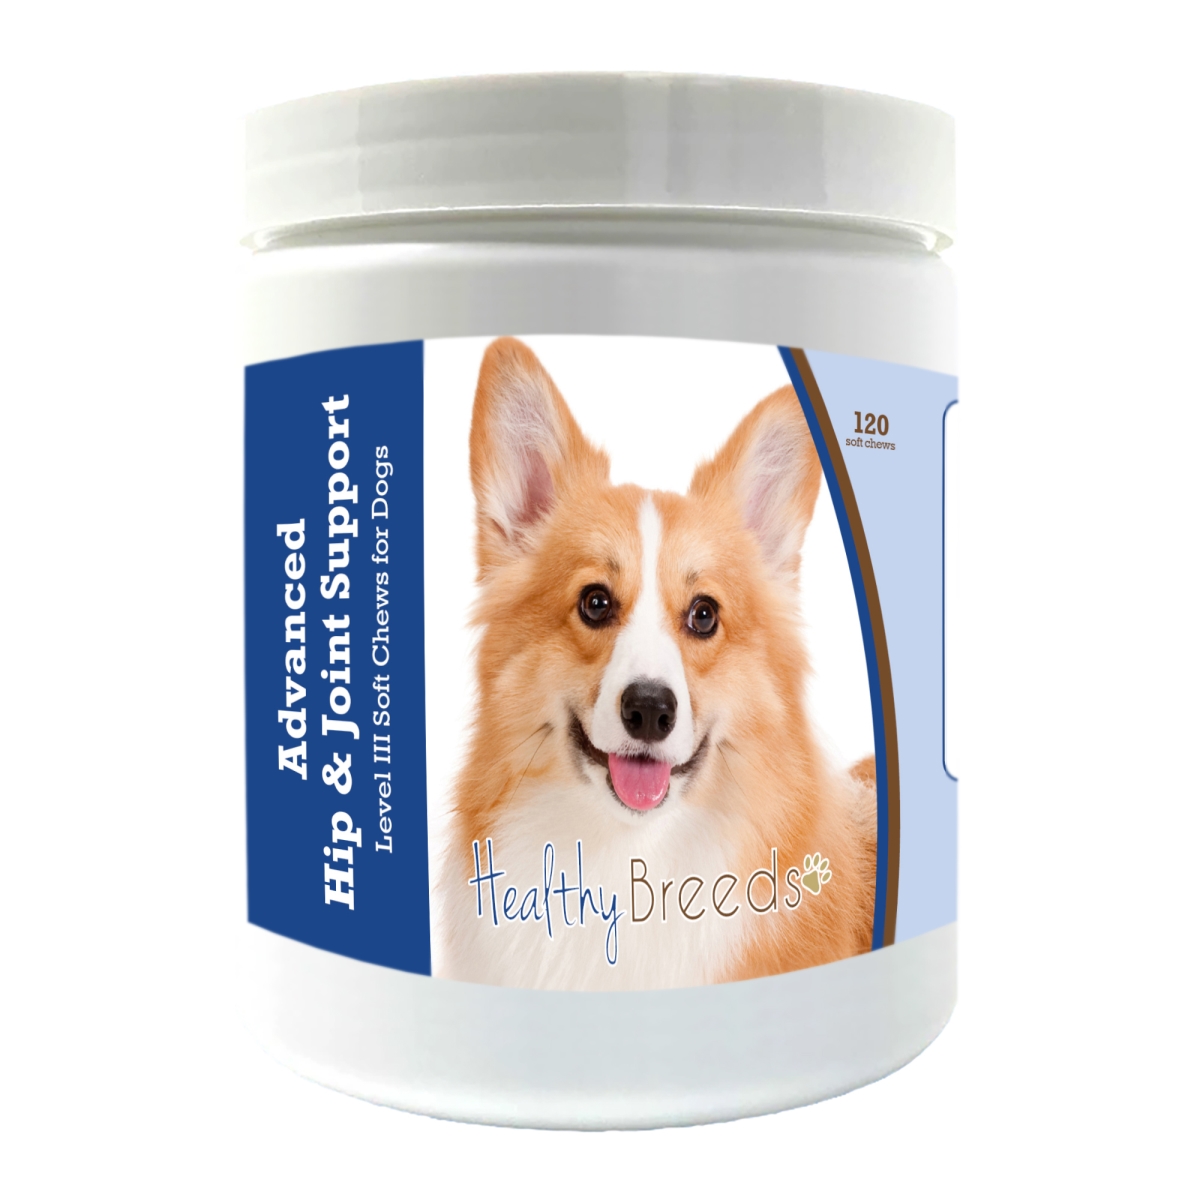 Picture of Healthy Breeds 192959899054 Pembroke Welsh Corgi Advanced Hip & Joint Support Level III Soft Chews for Dogs